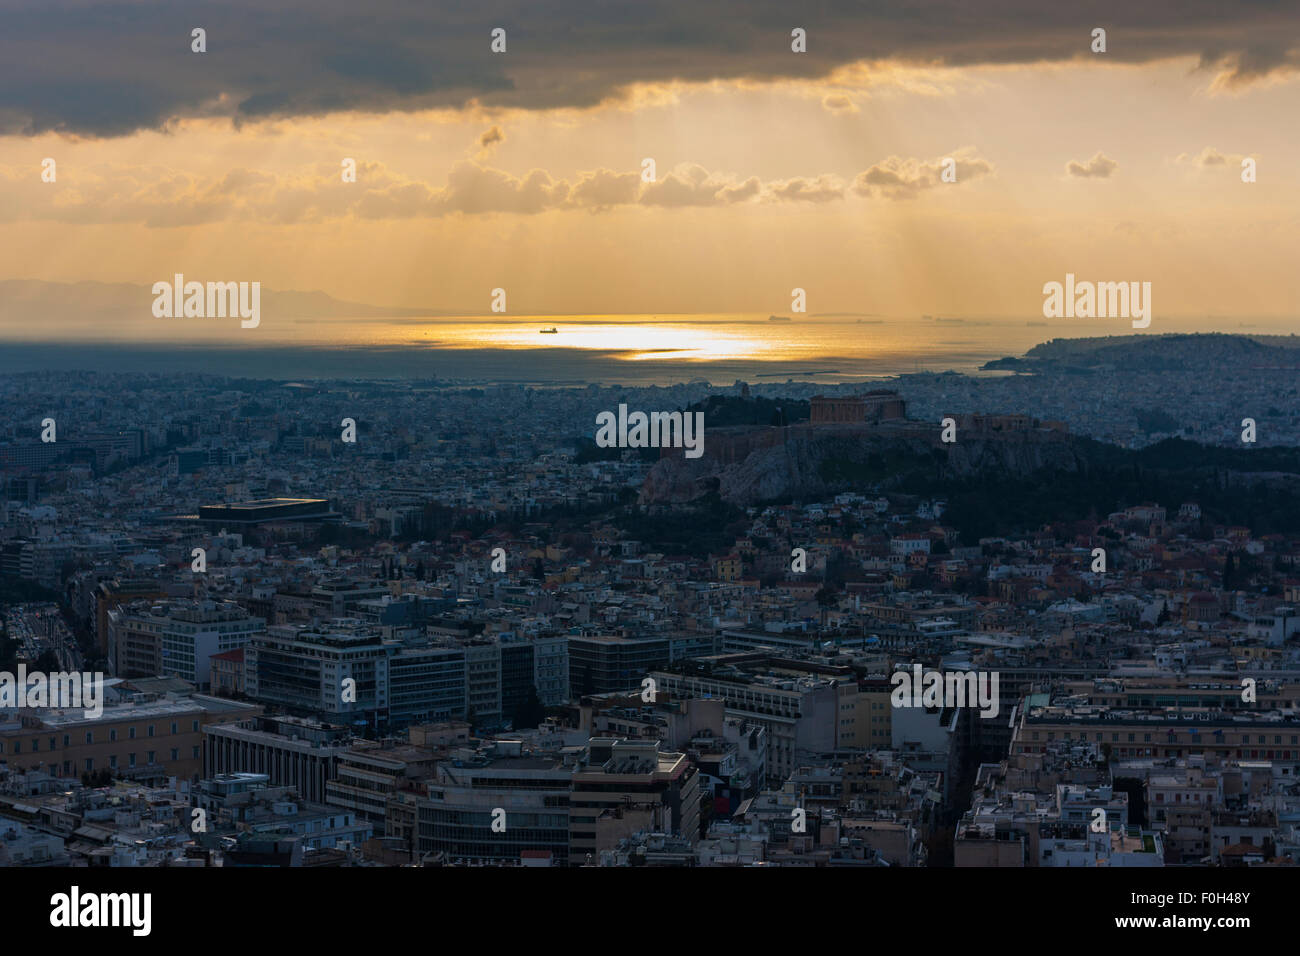 View of Athens and the Acropolis of Athens from Lykavittos Hill, Athens, Greece Stock Photo